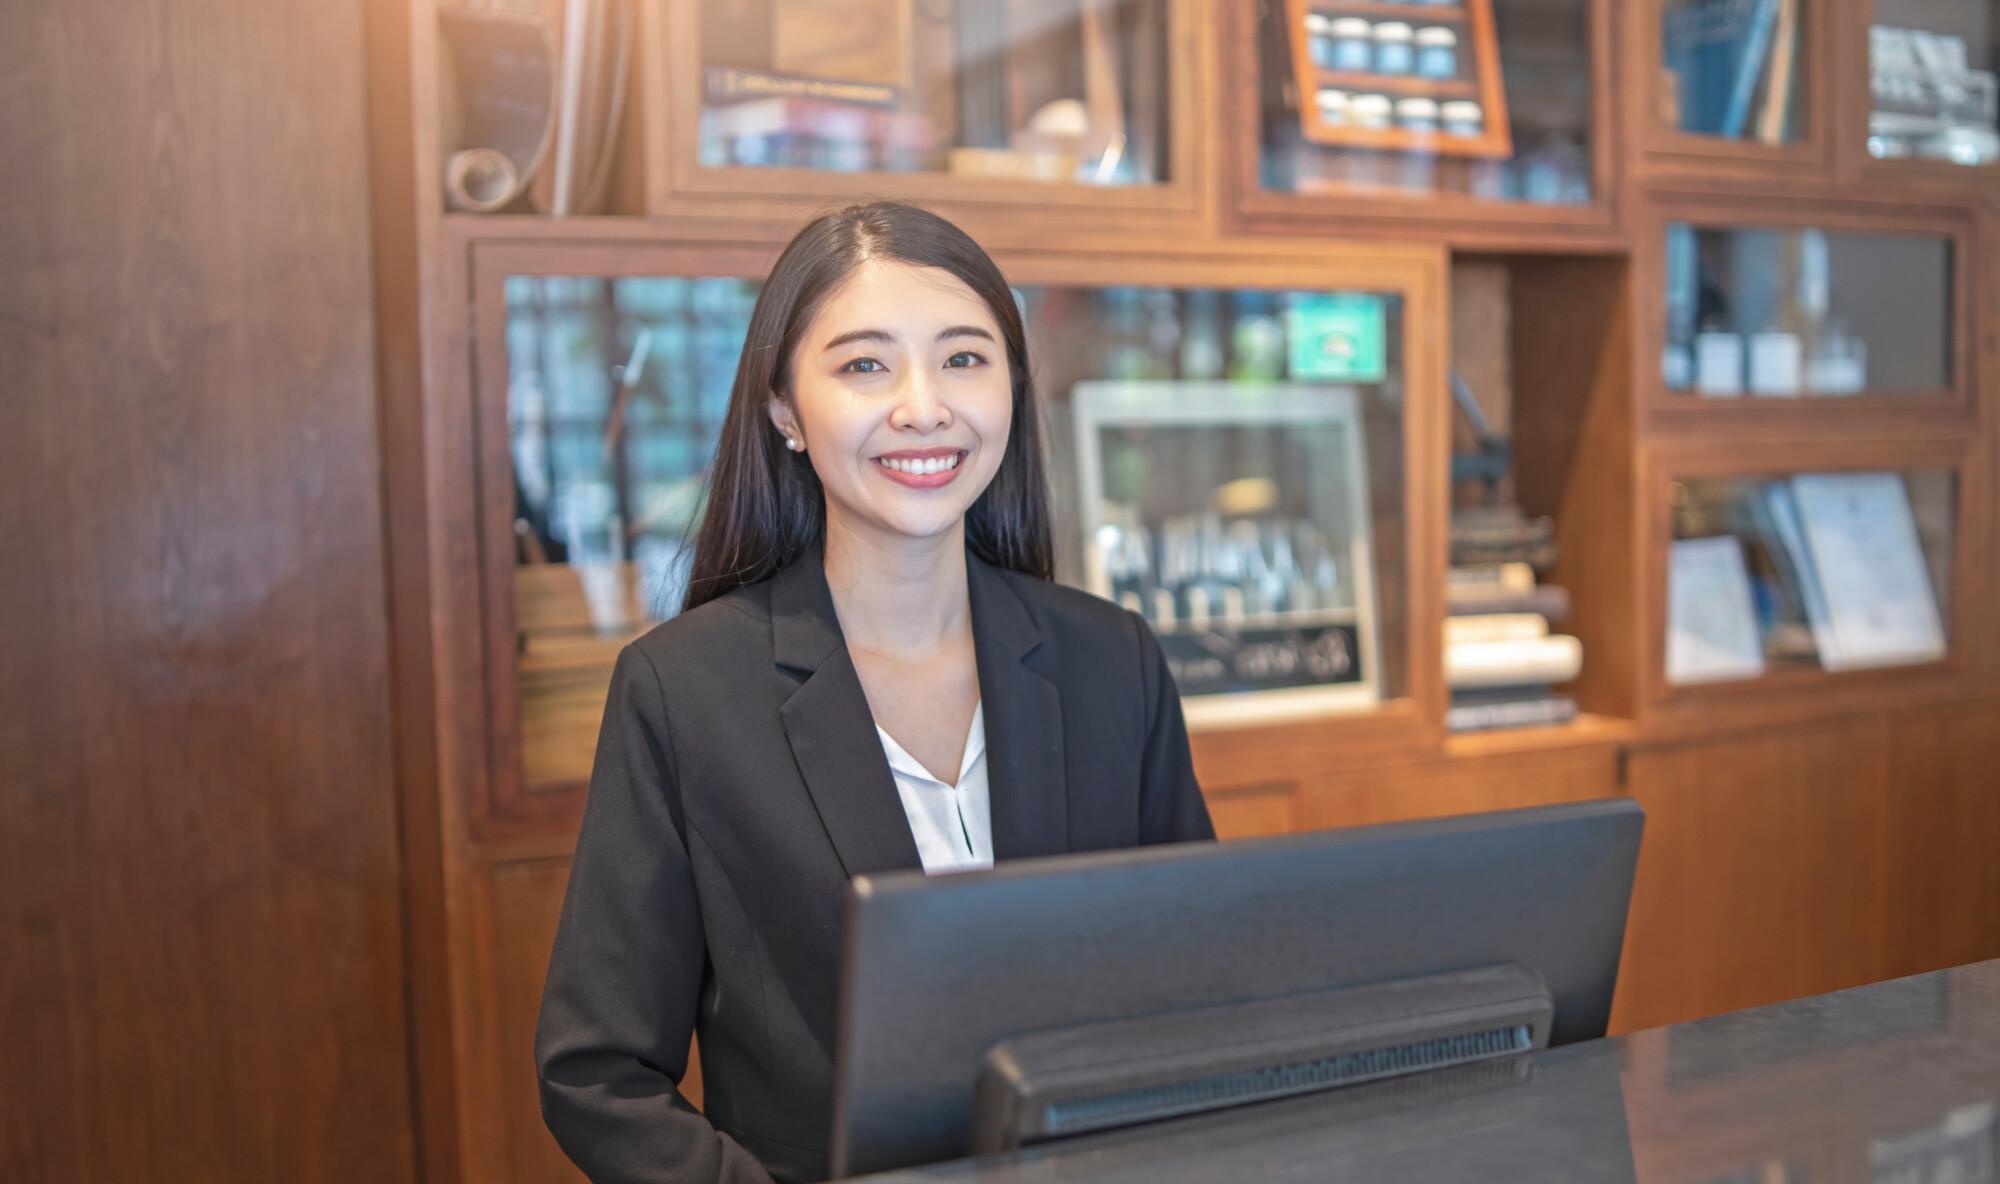 asian woman hotel receptionist standing behind a marble counter in front of a computer monitor smiling, long black hair wearing a suit and white shirt with wooden cabinets and books at the background.